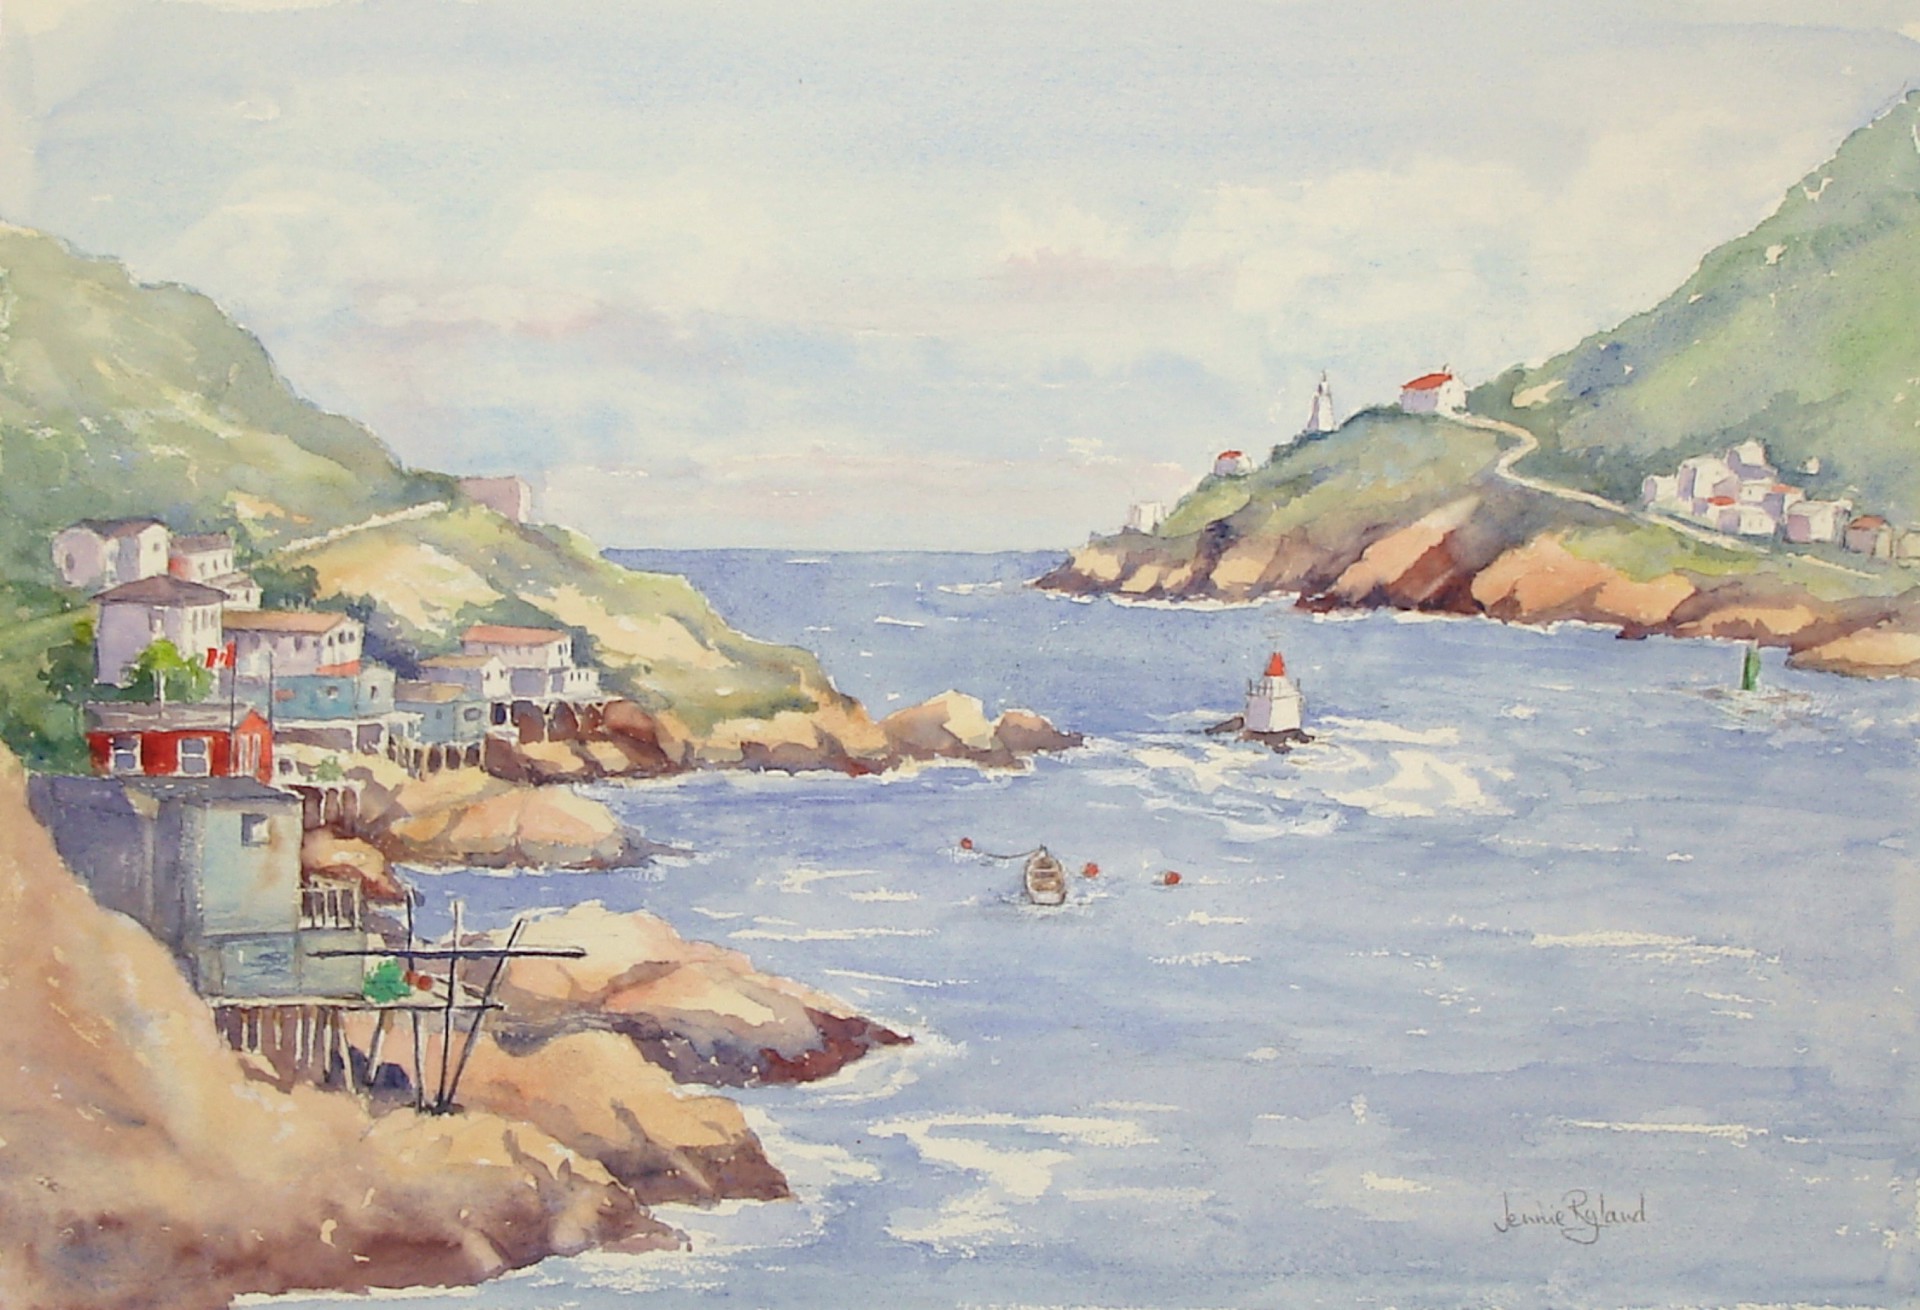 "The Narrows - A Beautiful Welcome to St John's" by Jennie Ryland